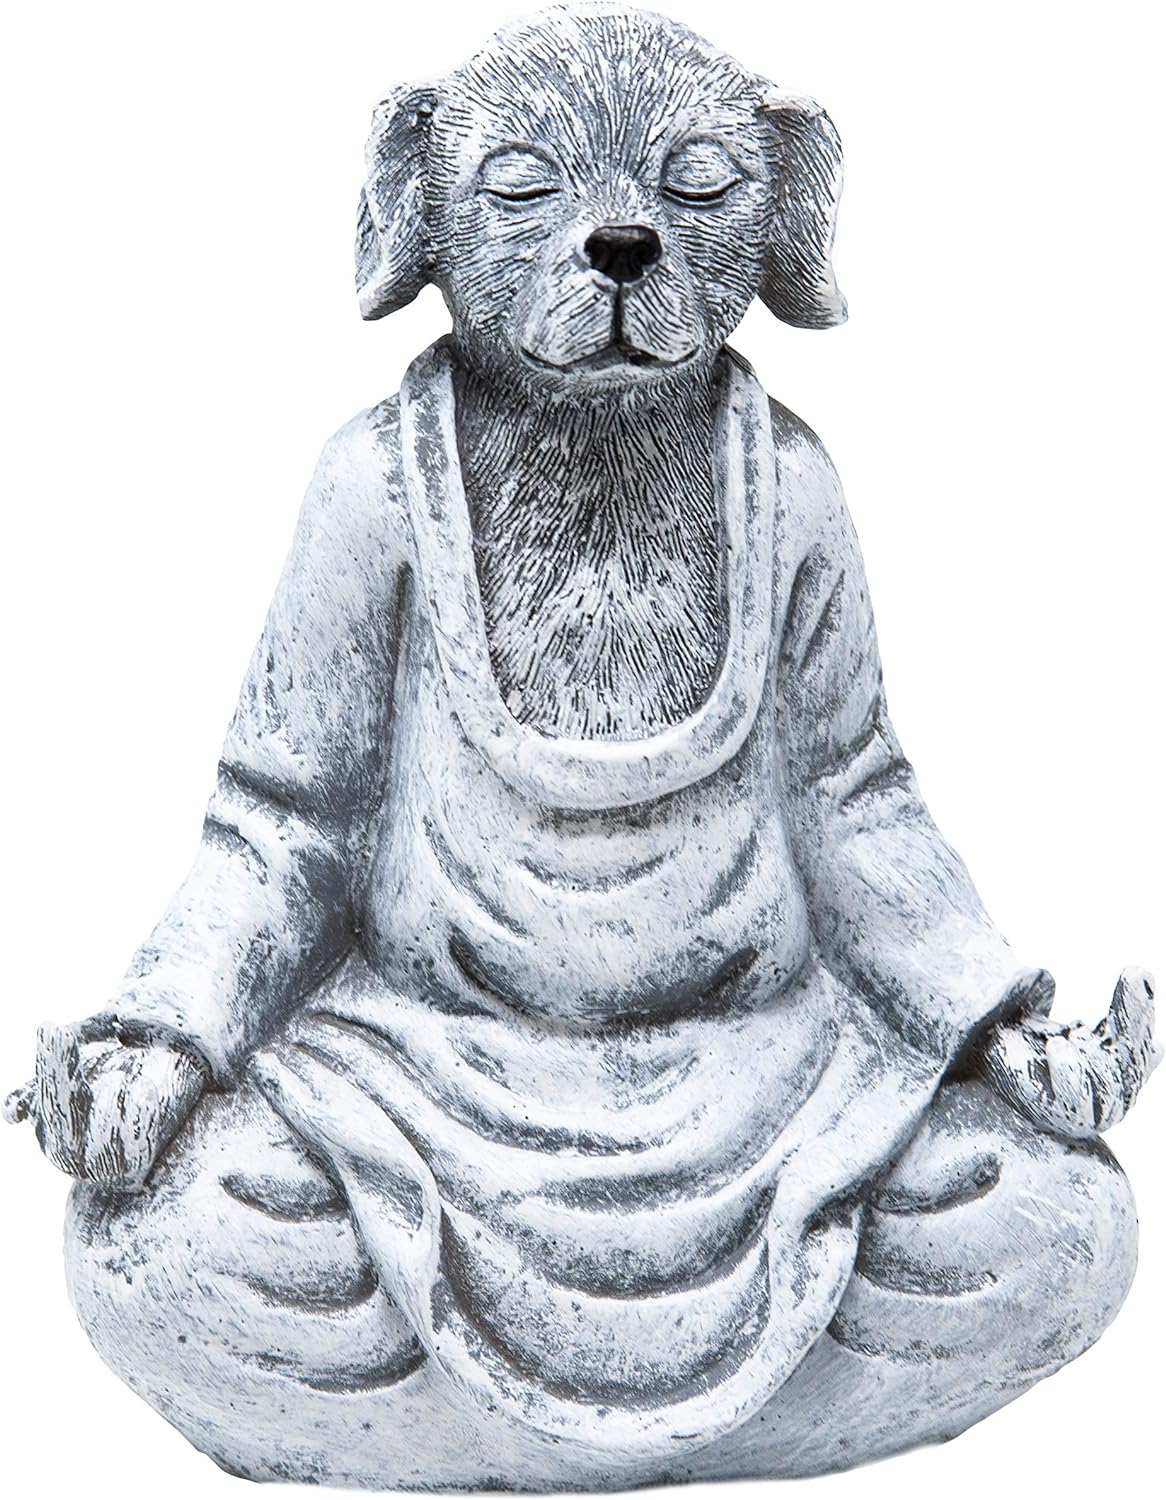 Garden Gnome Statue - Middle Finger Dog - Indoor/Outdoor Garden Gnome Sculpture for Patio, Yard or Lawn